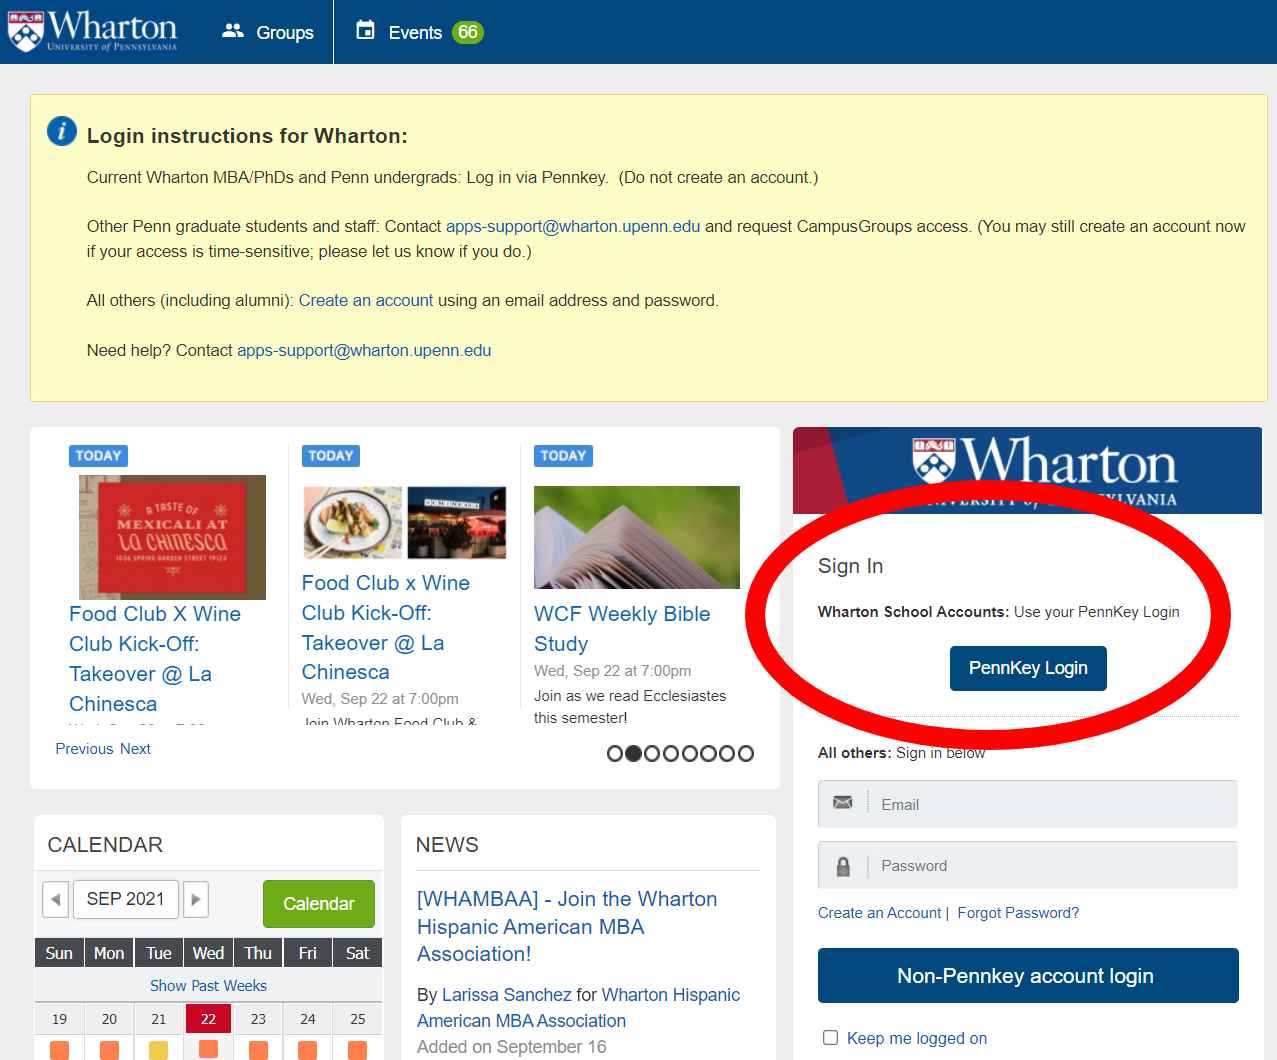 Sign In Wharton School Accounts, PennKey Login highlighted above Non-PenKey Account Login.